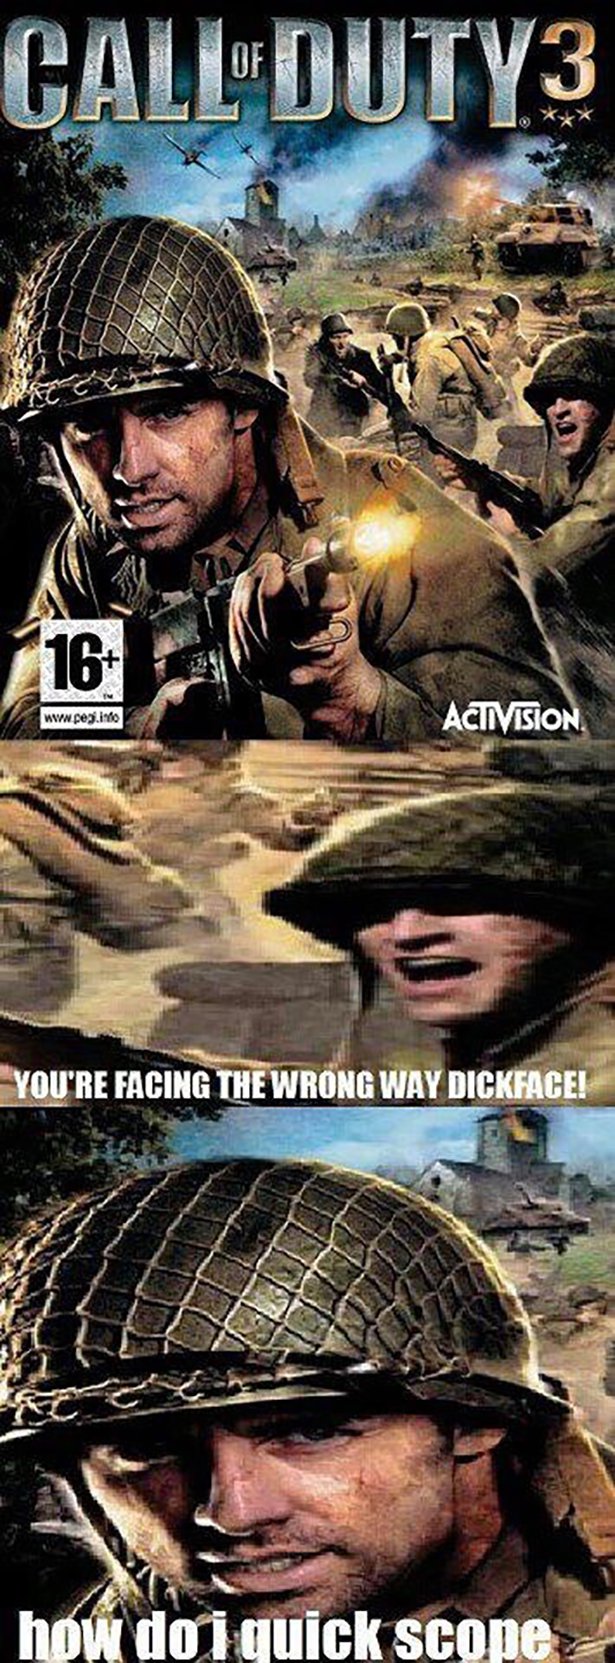 call of duty 3 usa - Call DUTY3 www peg.info Activision You'Re Facing The Wrong Way Dickface! how do i quick scope